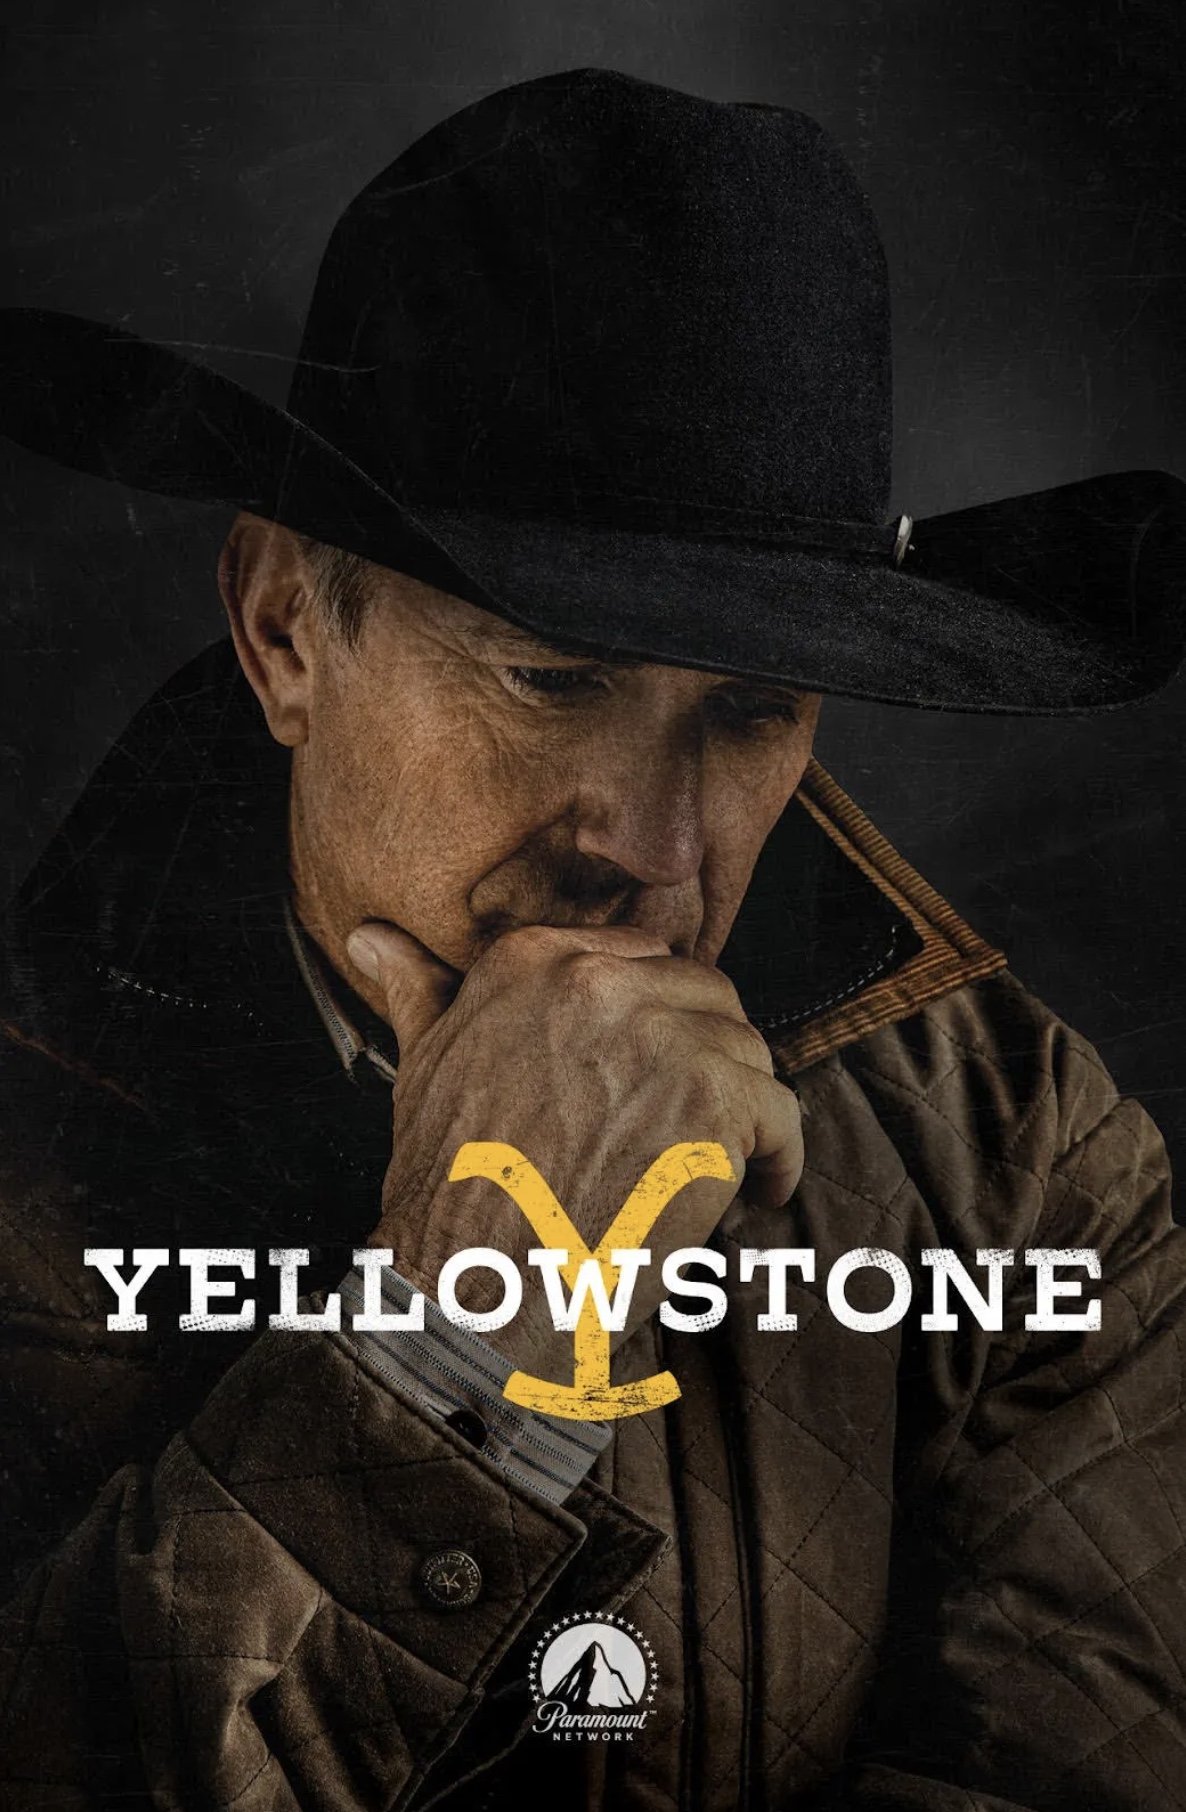 YELLOWSTONE Season 5 Part 2 Trailer and Poster Reveals Its Summer 2023 ...